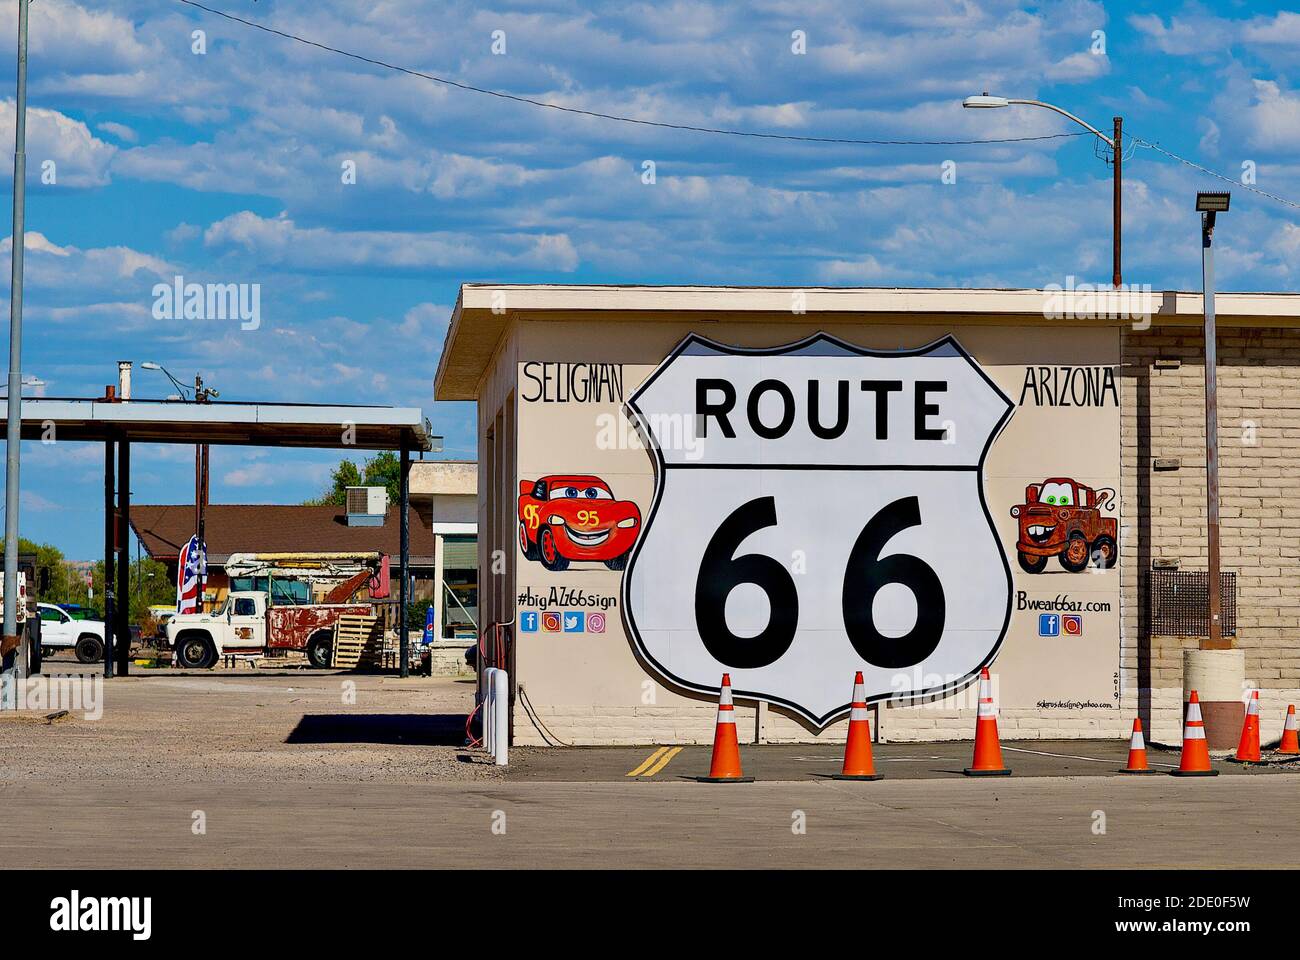 Seligman, Arizona, USA - July 30, 2020: A large painting of a 'Route 66' sign welcomes visitors to the town of Seligman, located on Historic Route 66. Stock Photo